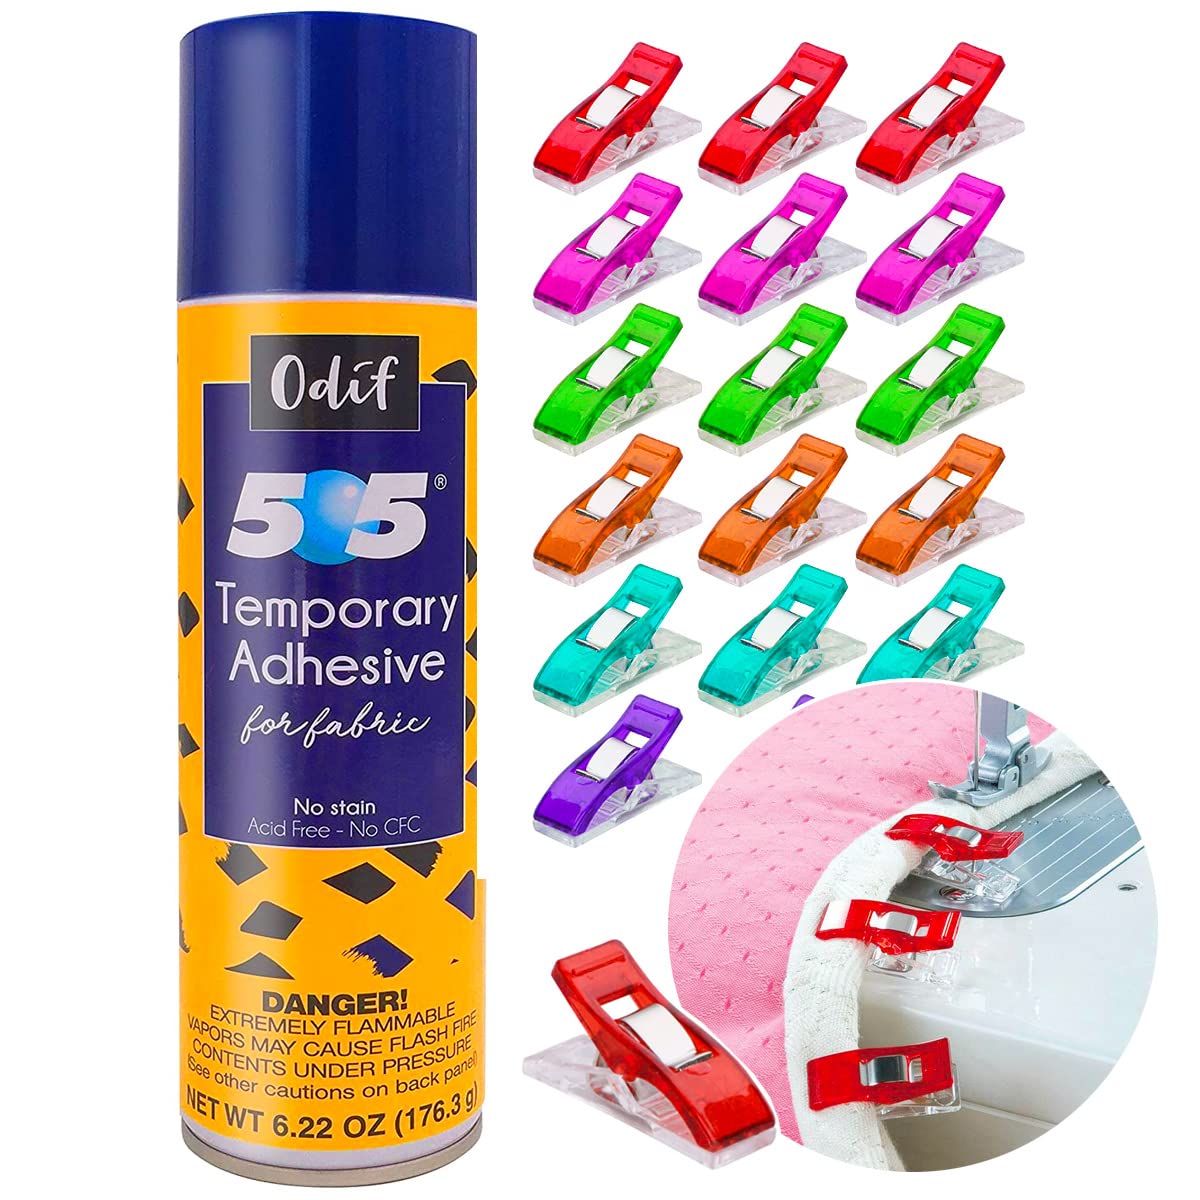 505 Spray and Fix Temporary Adhesive - All Threads